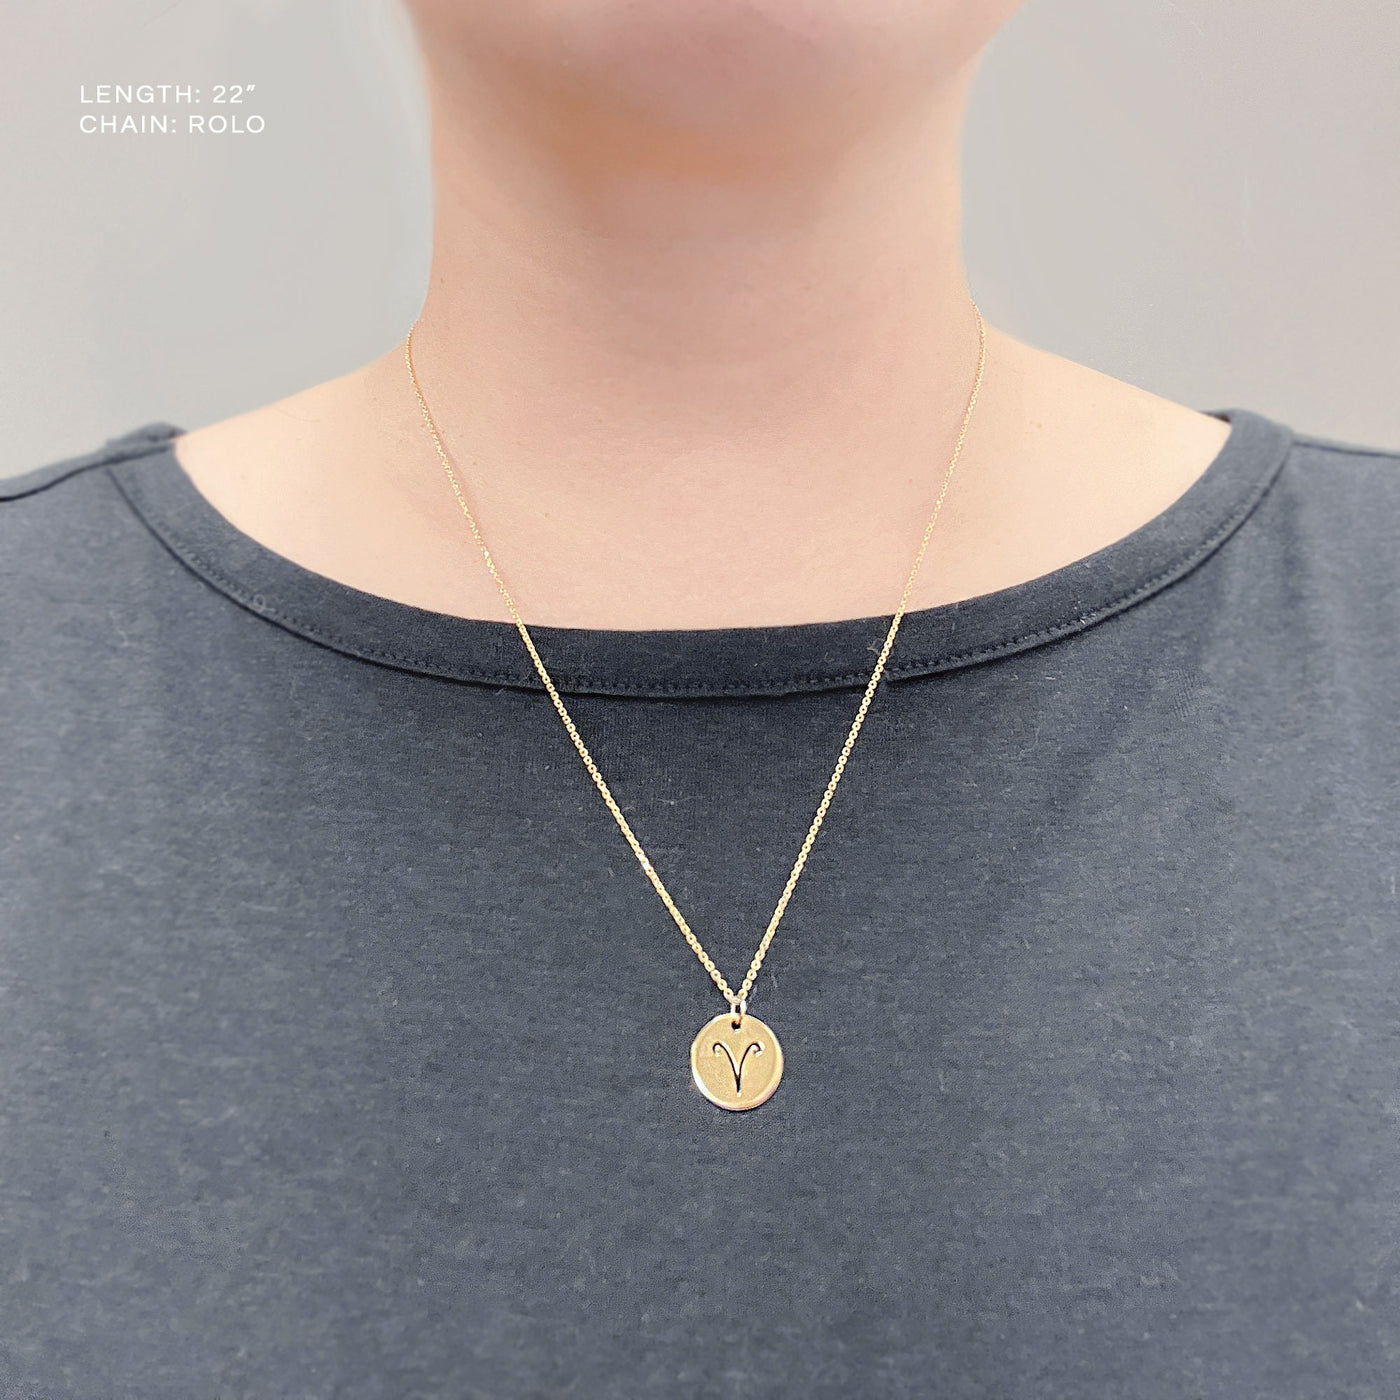 Aries Zodiac Sign Cut-Out Necklace